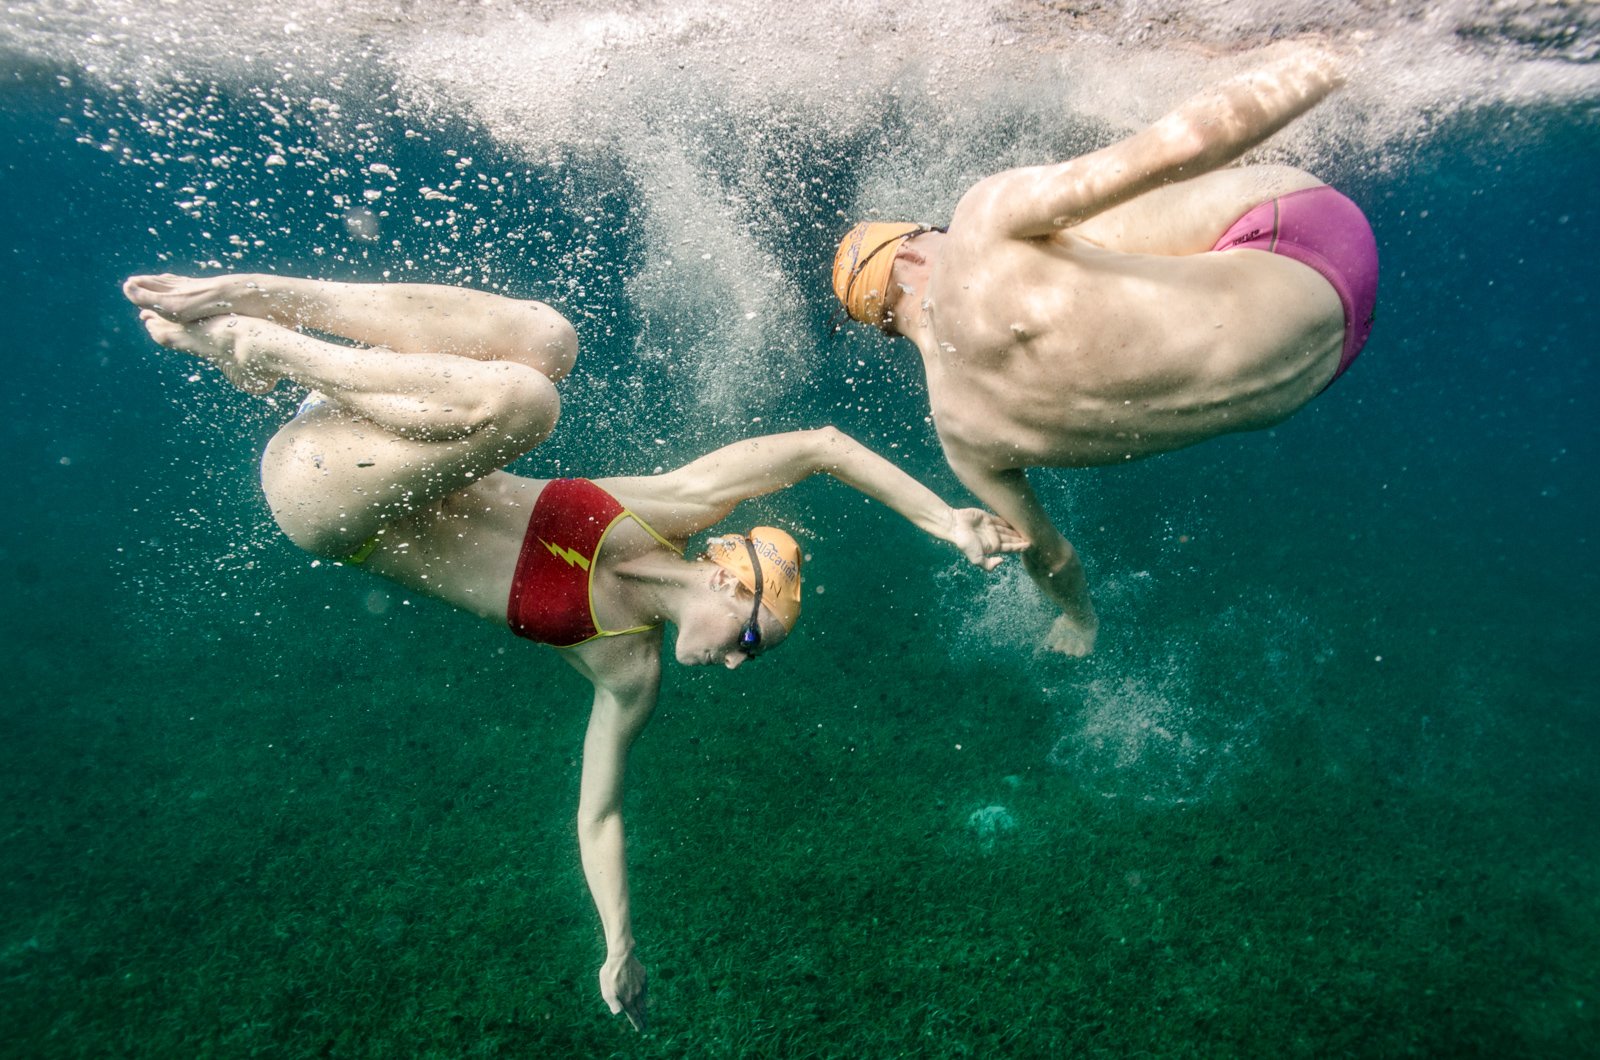 Heather Perry's original underwater image of two swimmers for Swim Vacation